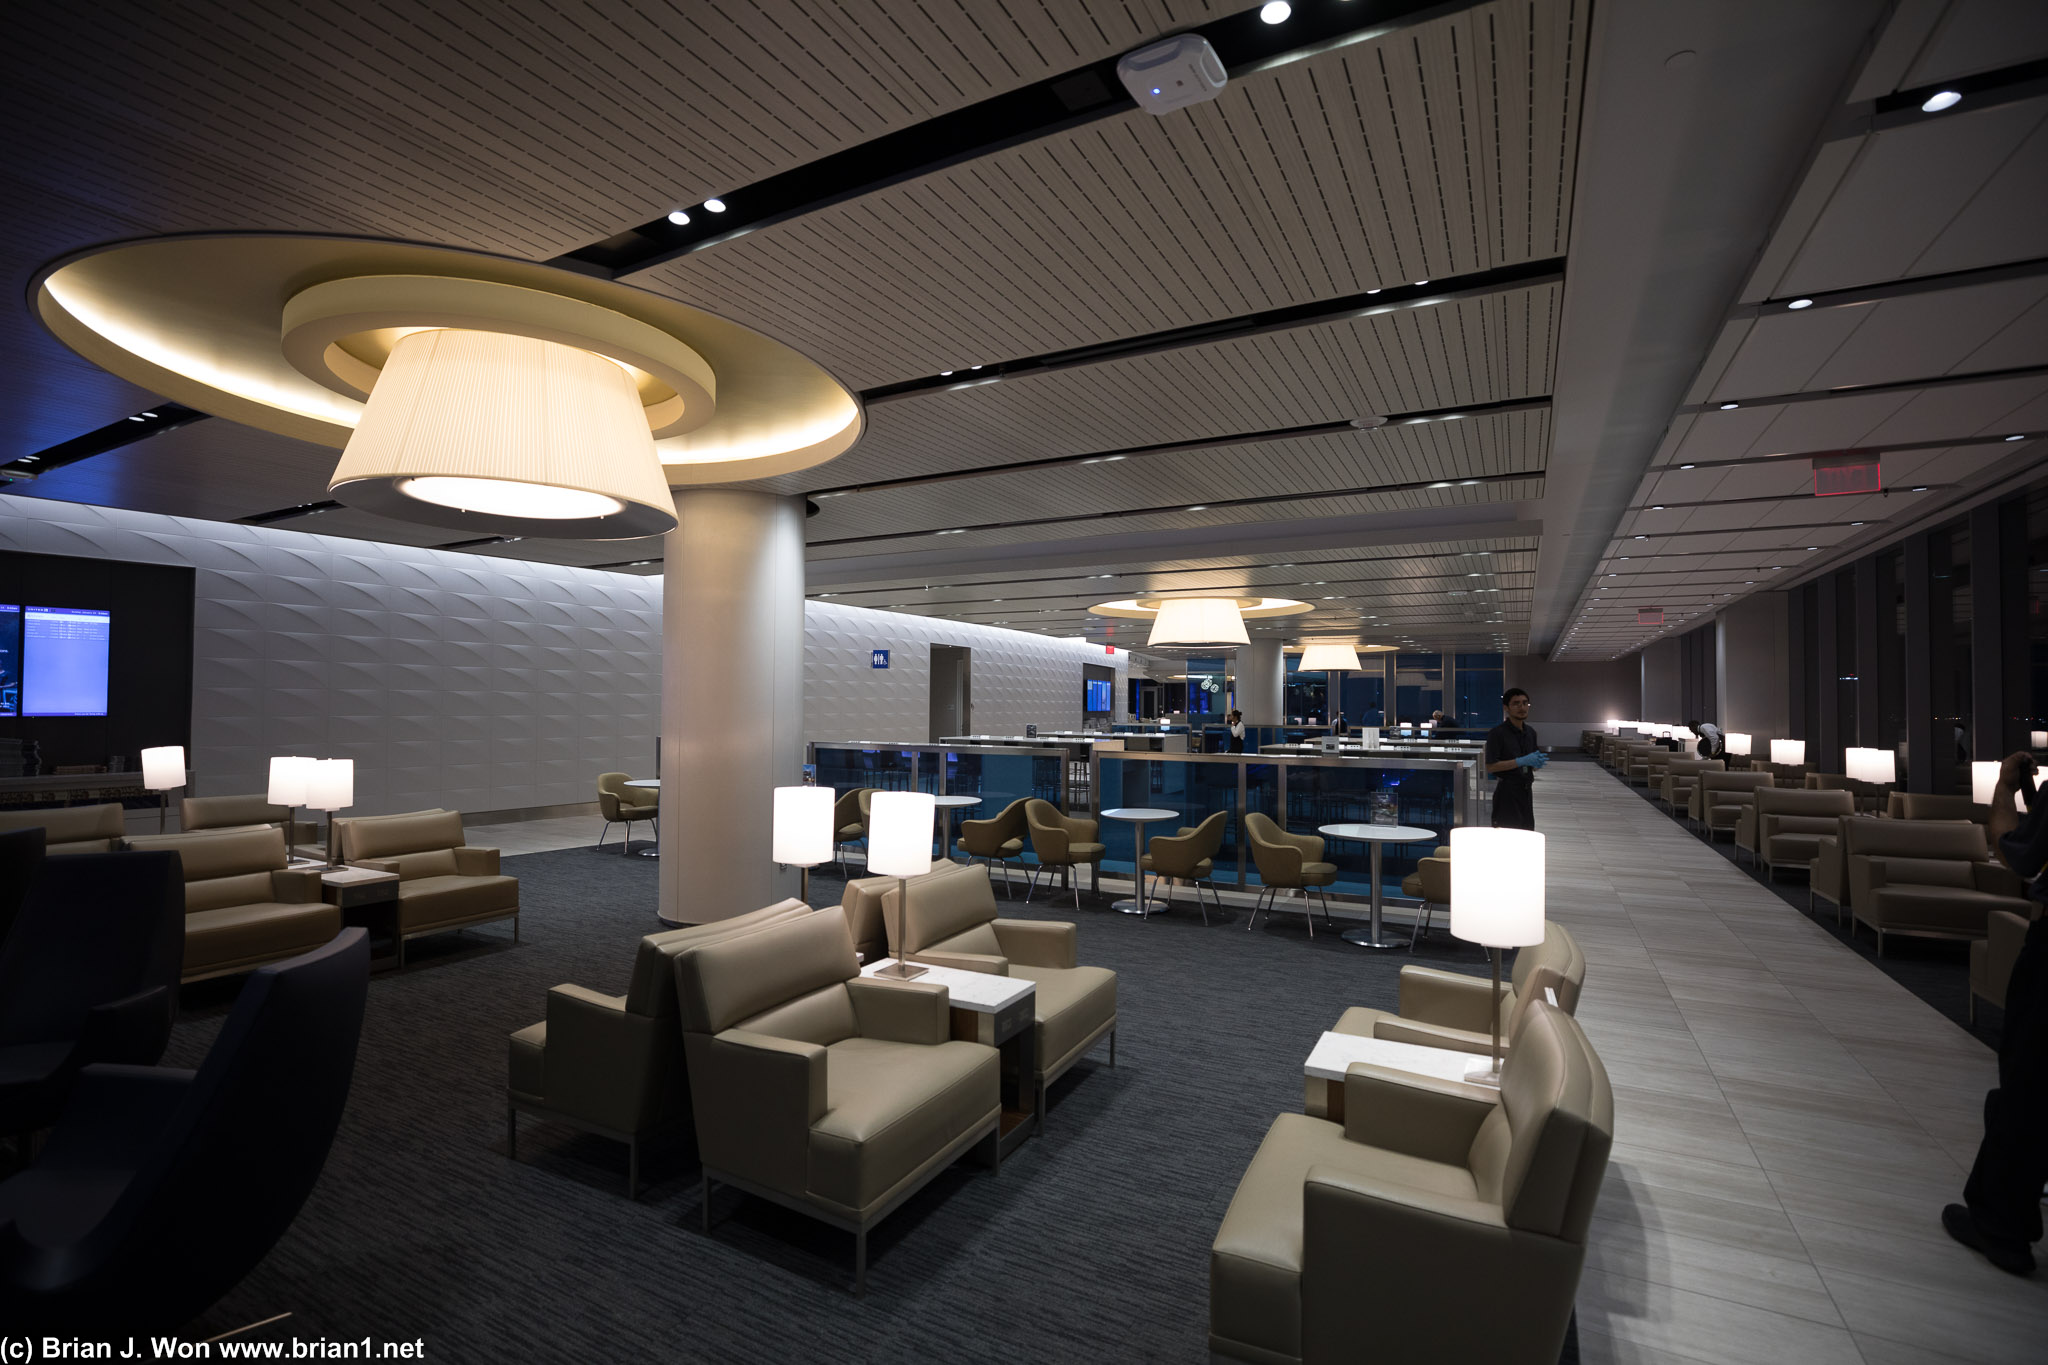 The new United Club at LAX.